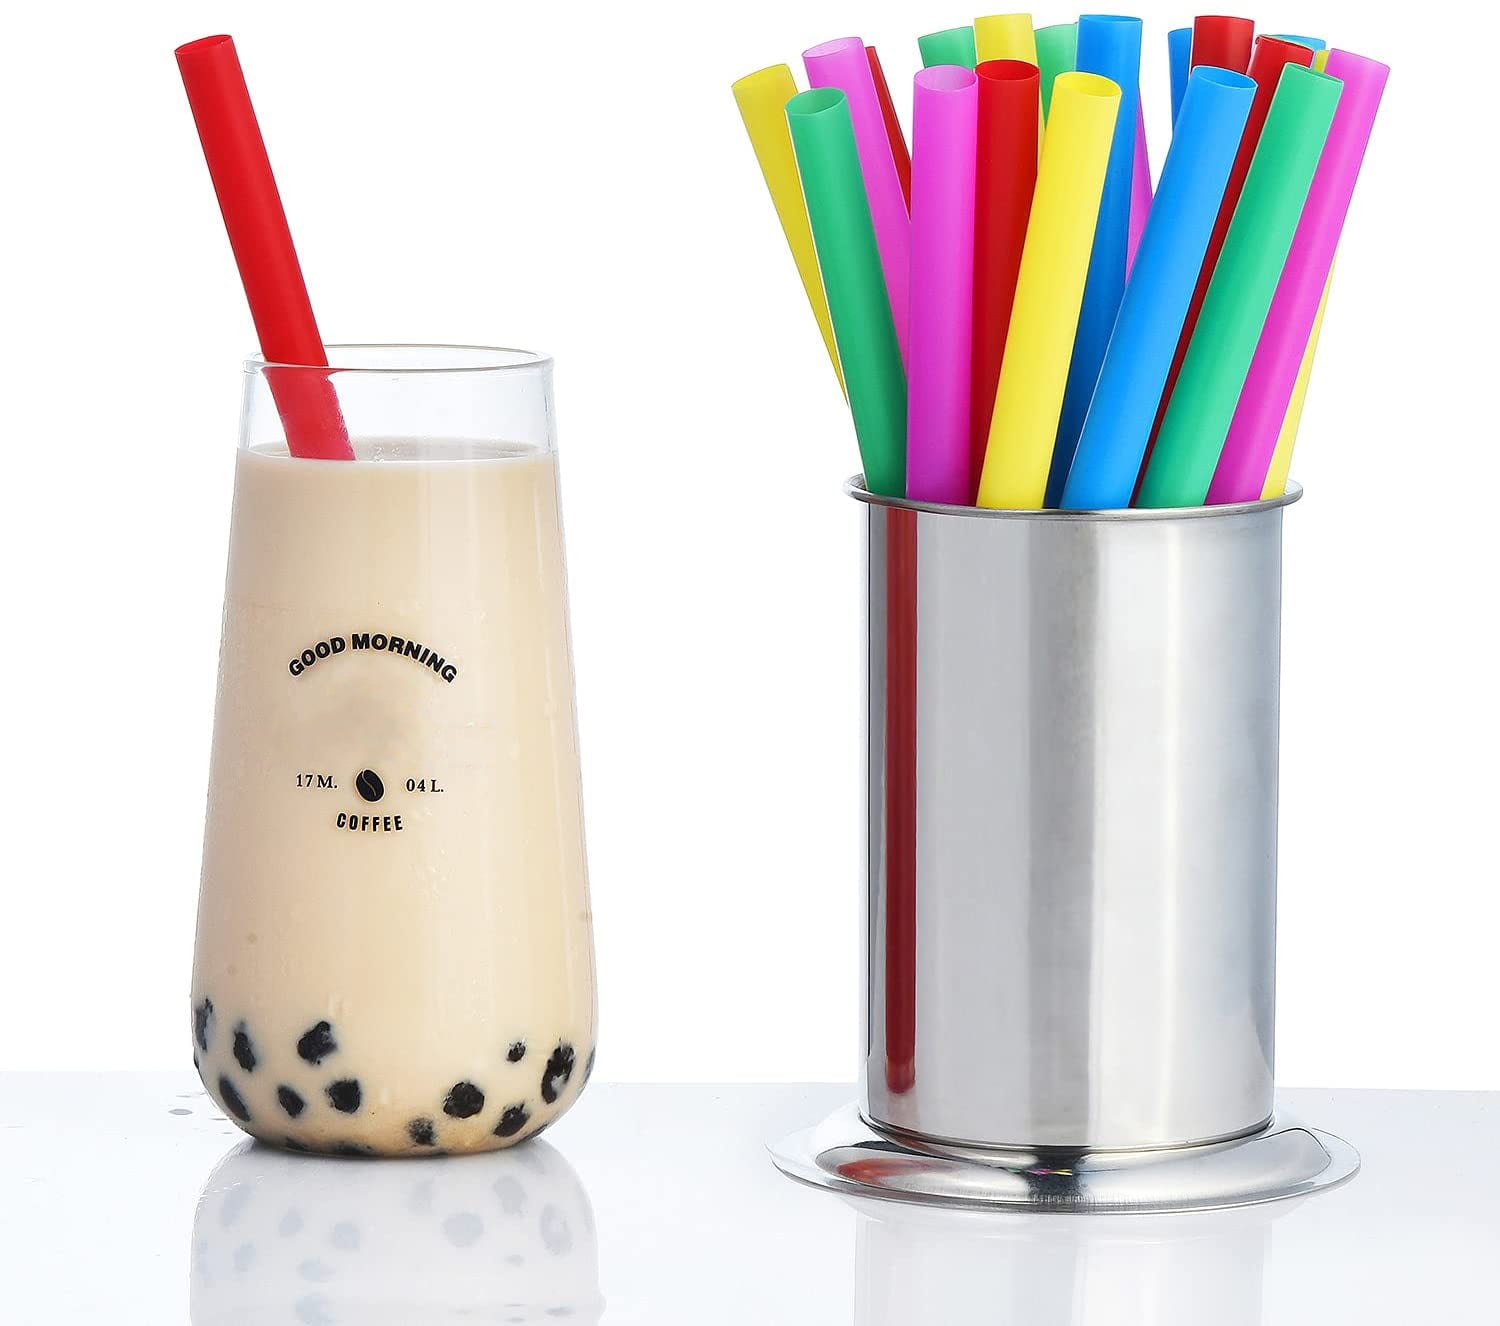 50/100pcs Cusp Straw Chain Package Curved Wrapped Drinking 3.6*150mm PP  Thin Straws Milk Tea Drinks Small Straws Smoothies Party